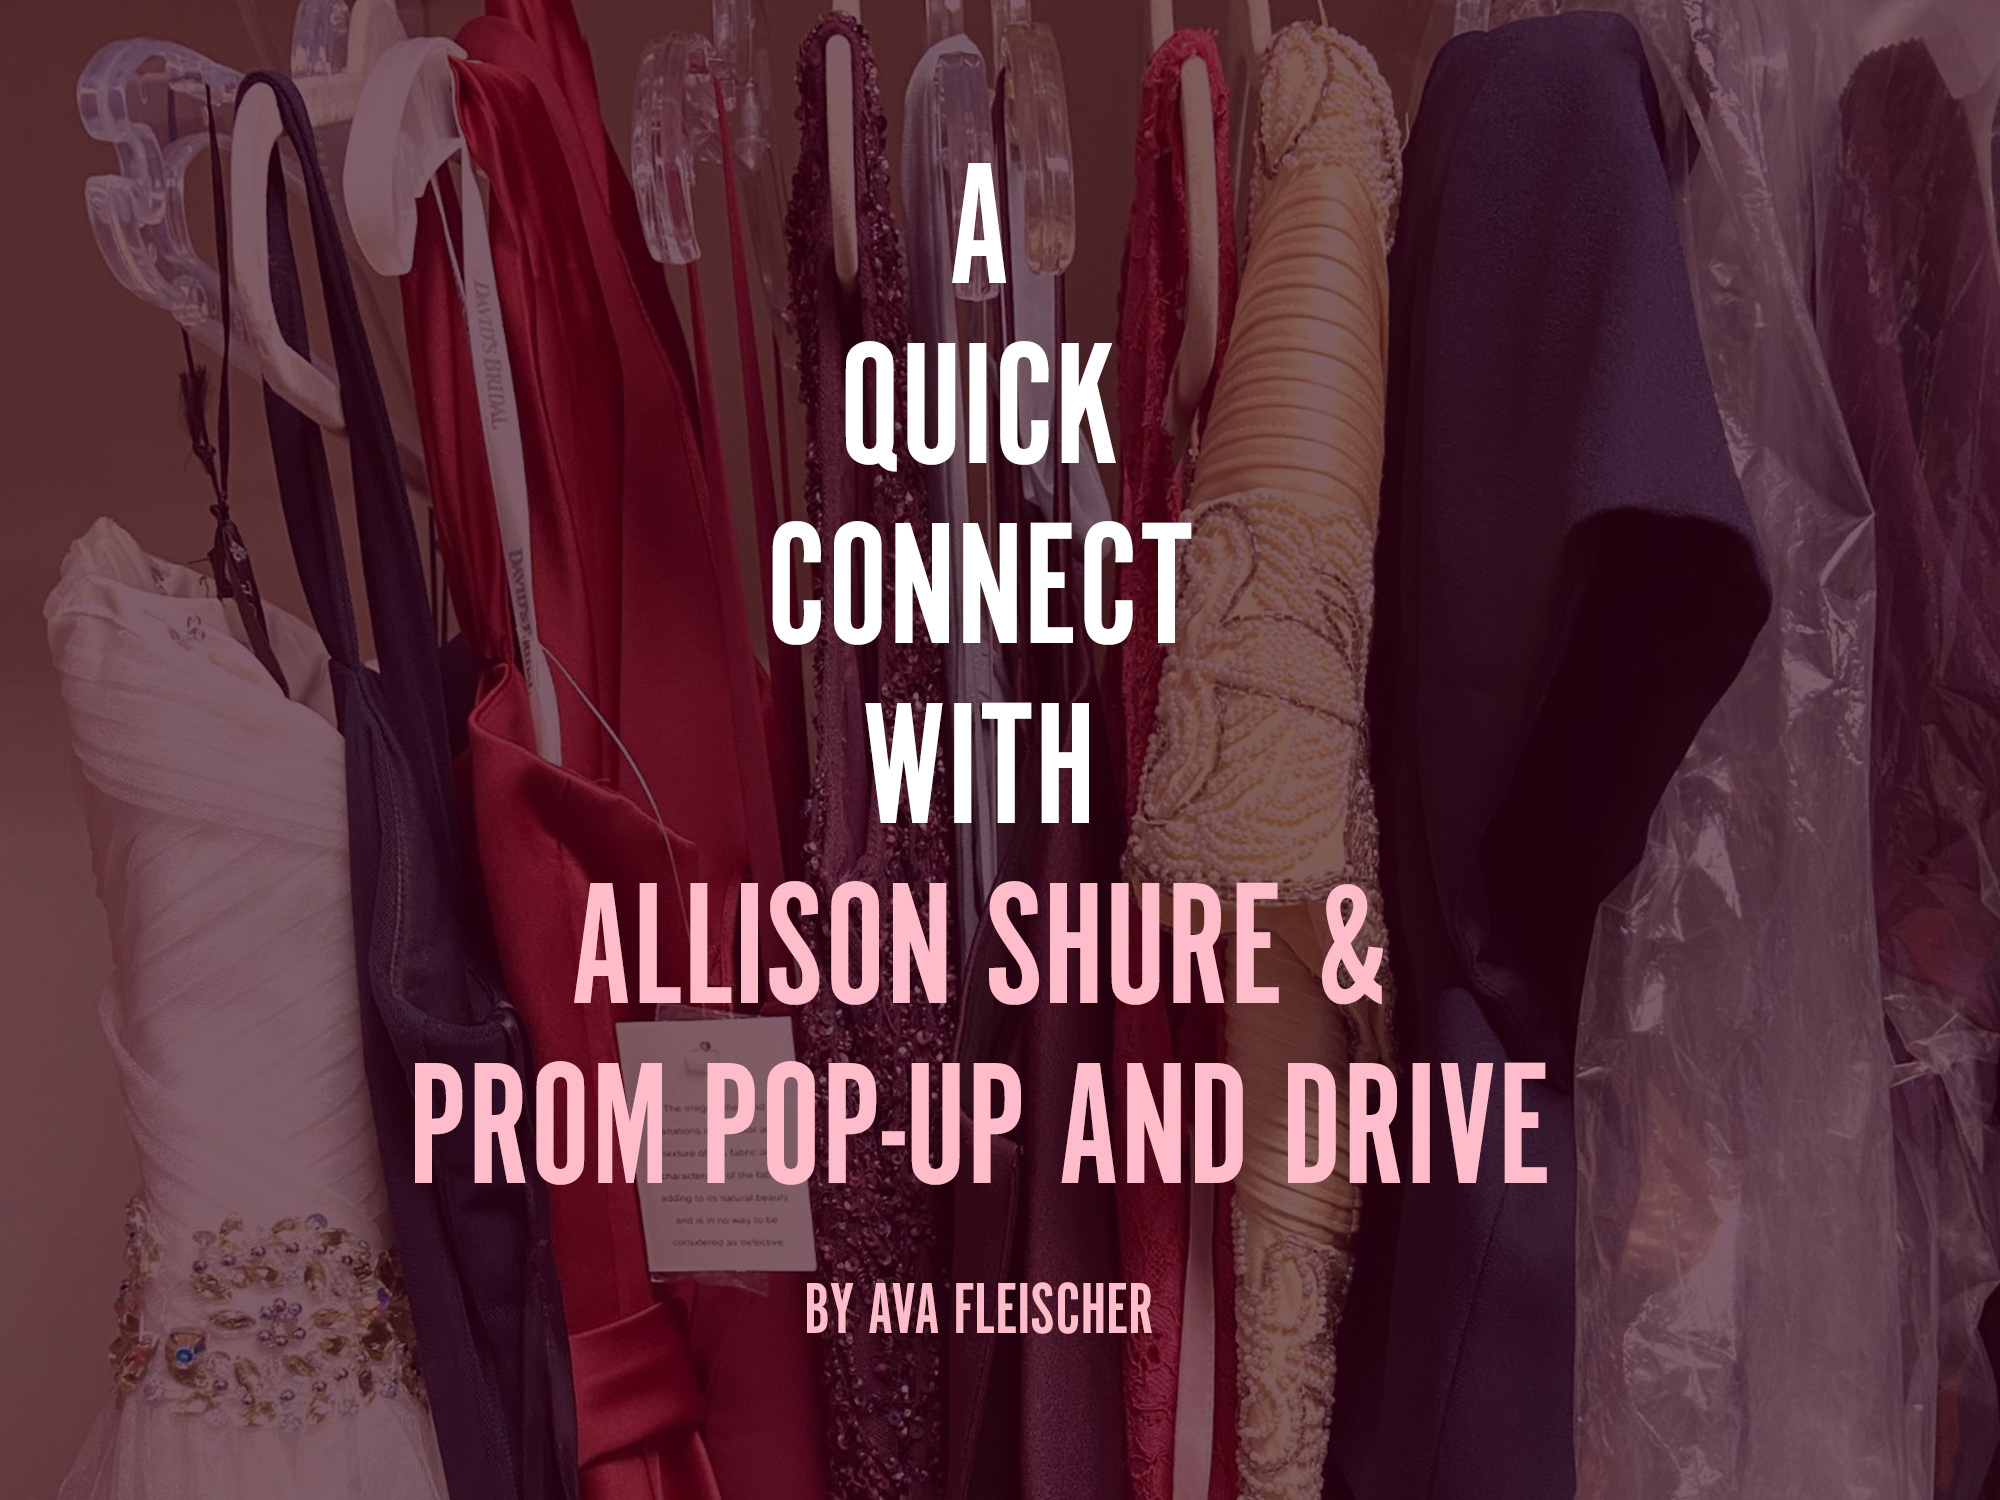 A Quick Connect with ... Allison Shure